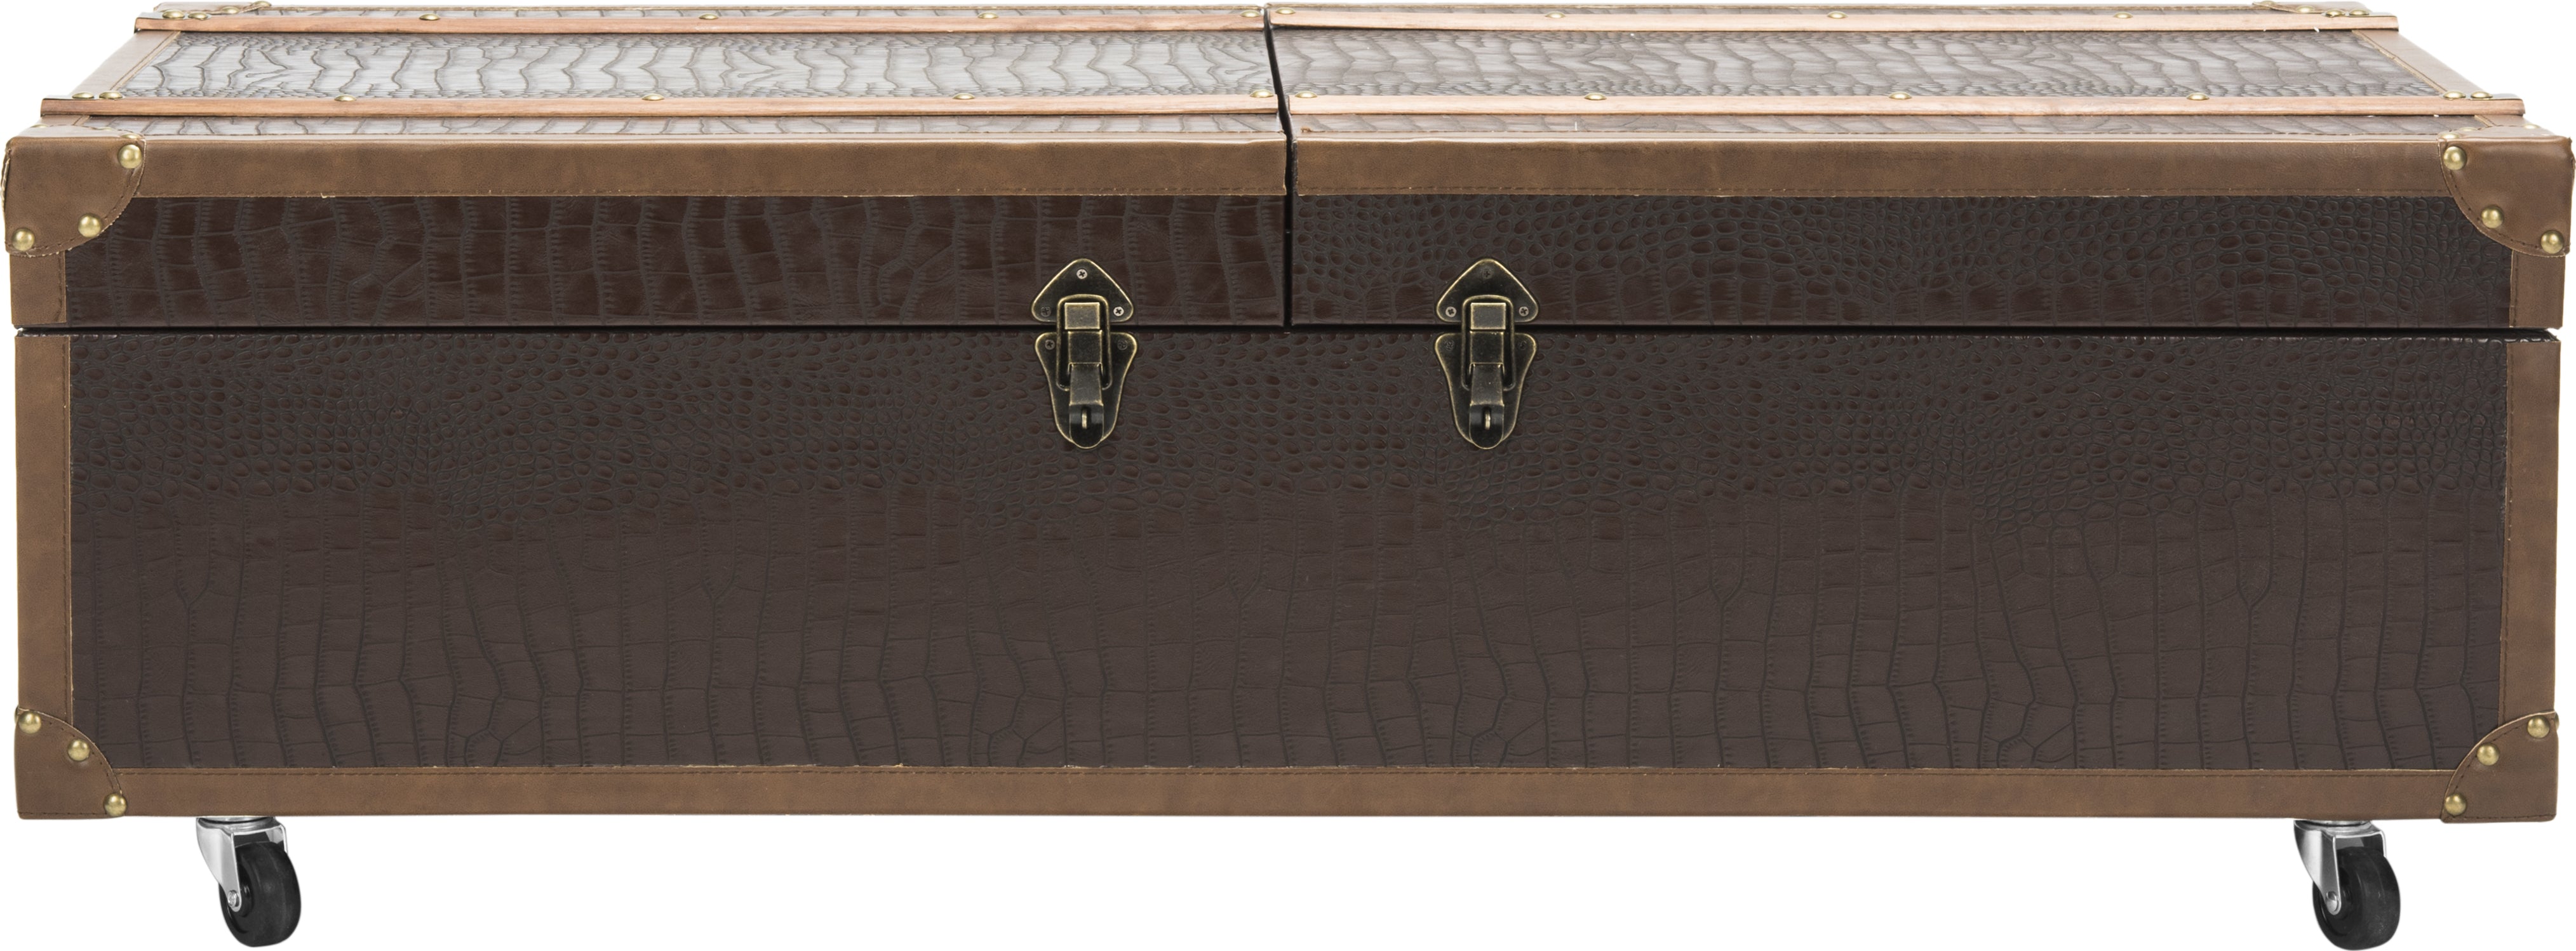  Safavieh Home Collection Zoe Cognac Brown Faux Leather Storage  Trunk Wine Rack Coffee Table with Caster Wheels (Fully Assembled) FOX9515E  : Home & Kitchen